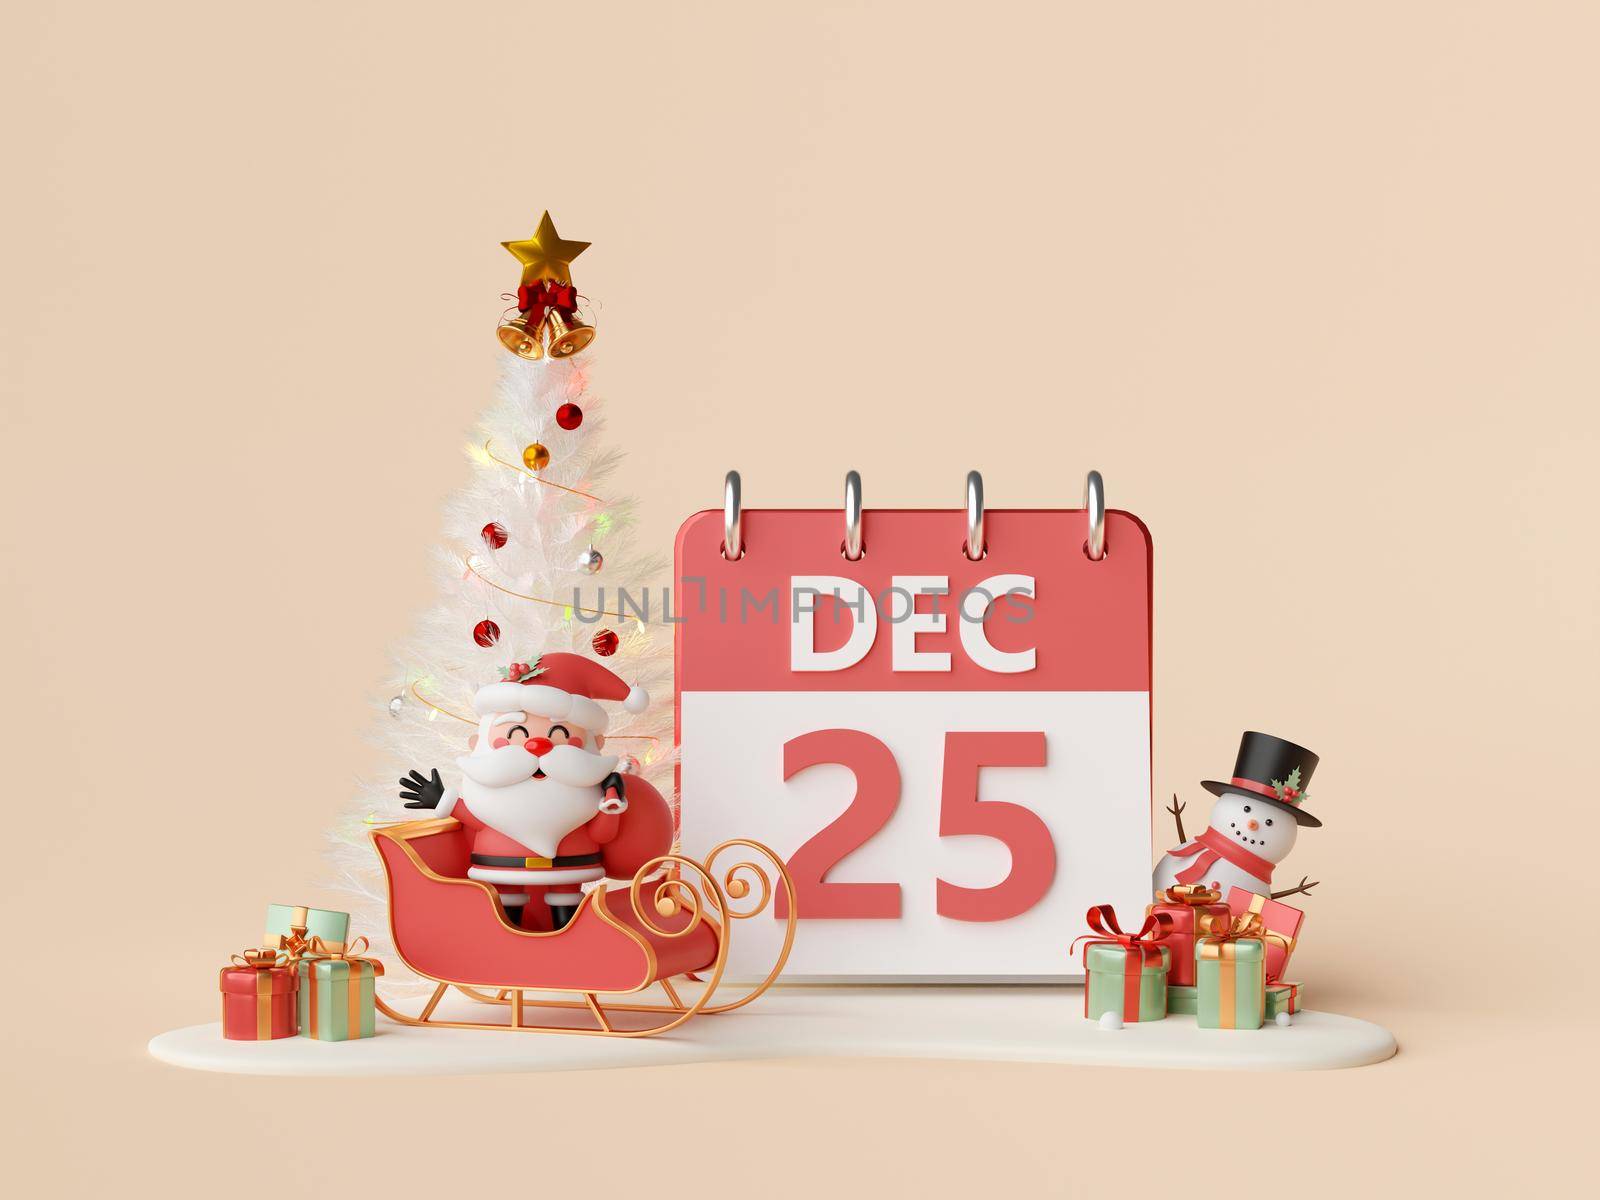 3d illustration of 25 Dec calendar with Santa Claus and Christmas tree, Merry Christmas